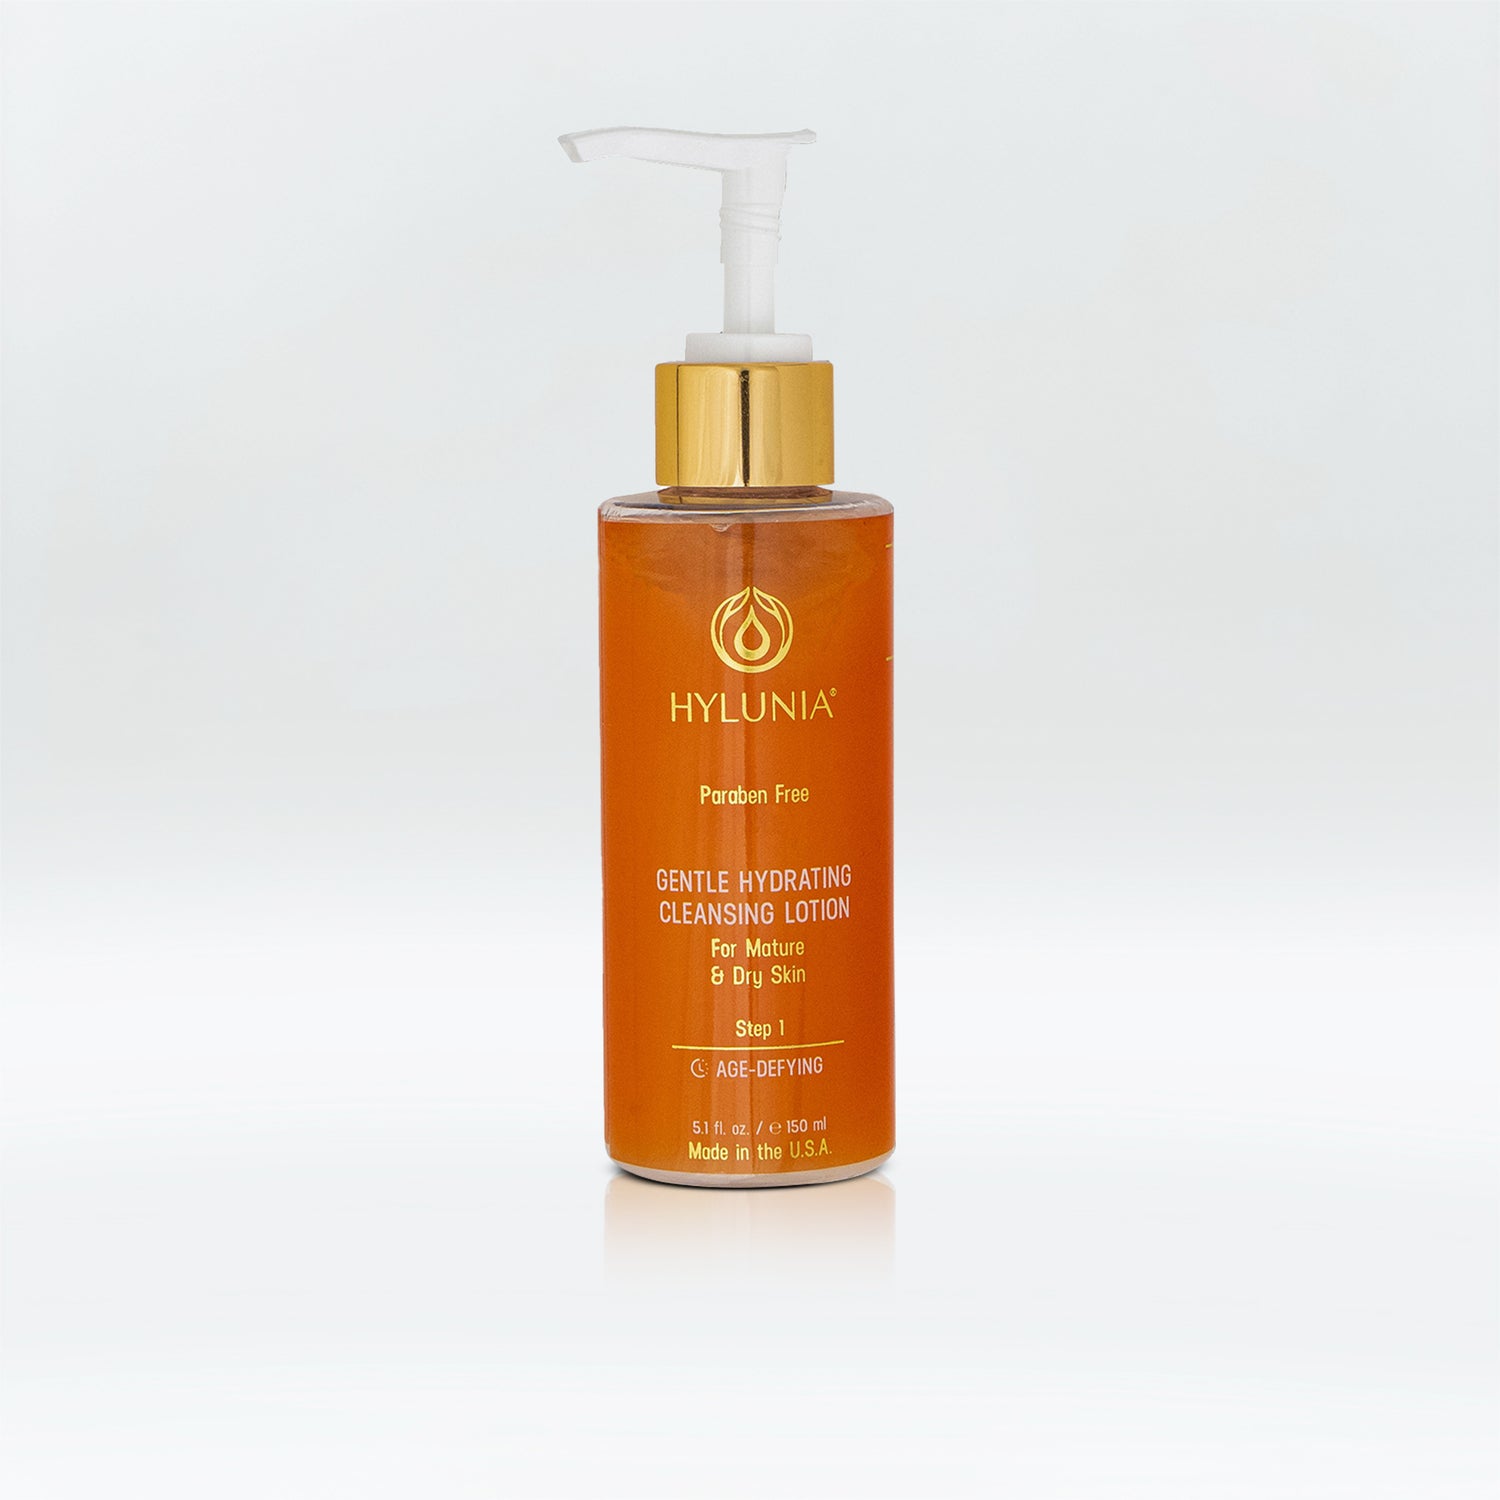 Gentle Hydrating Cleansing Lotion